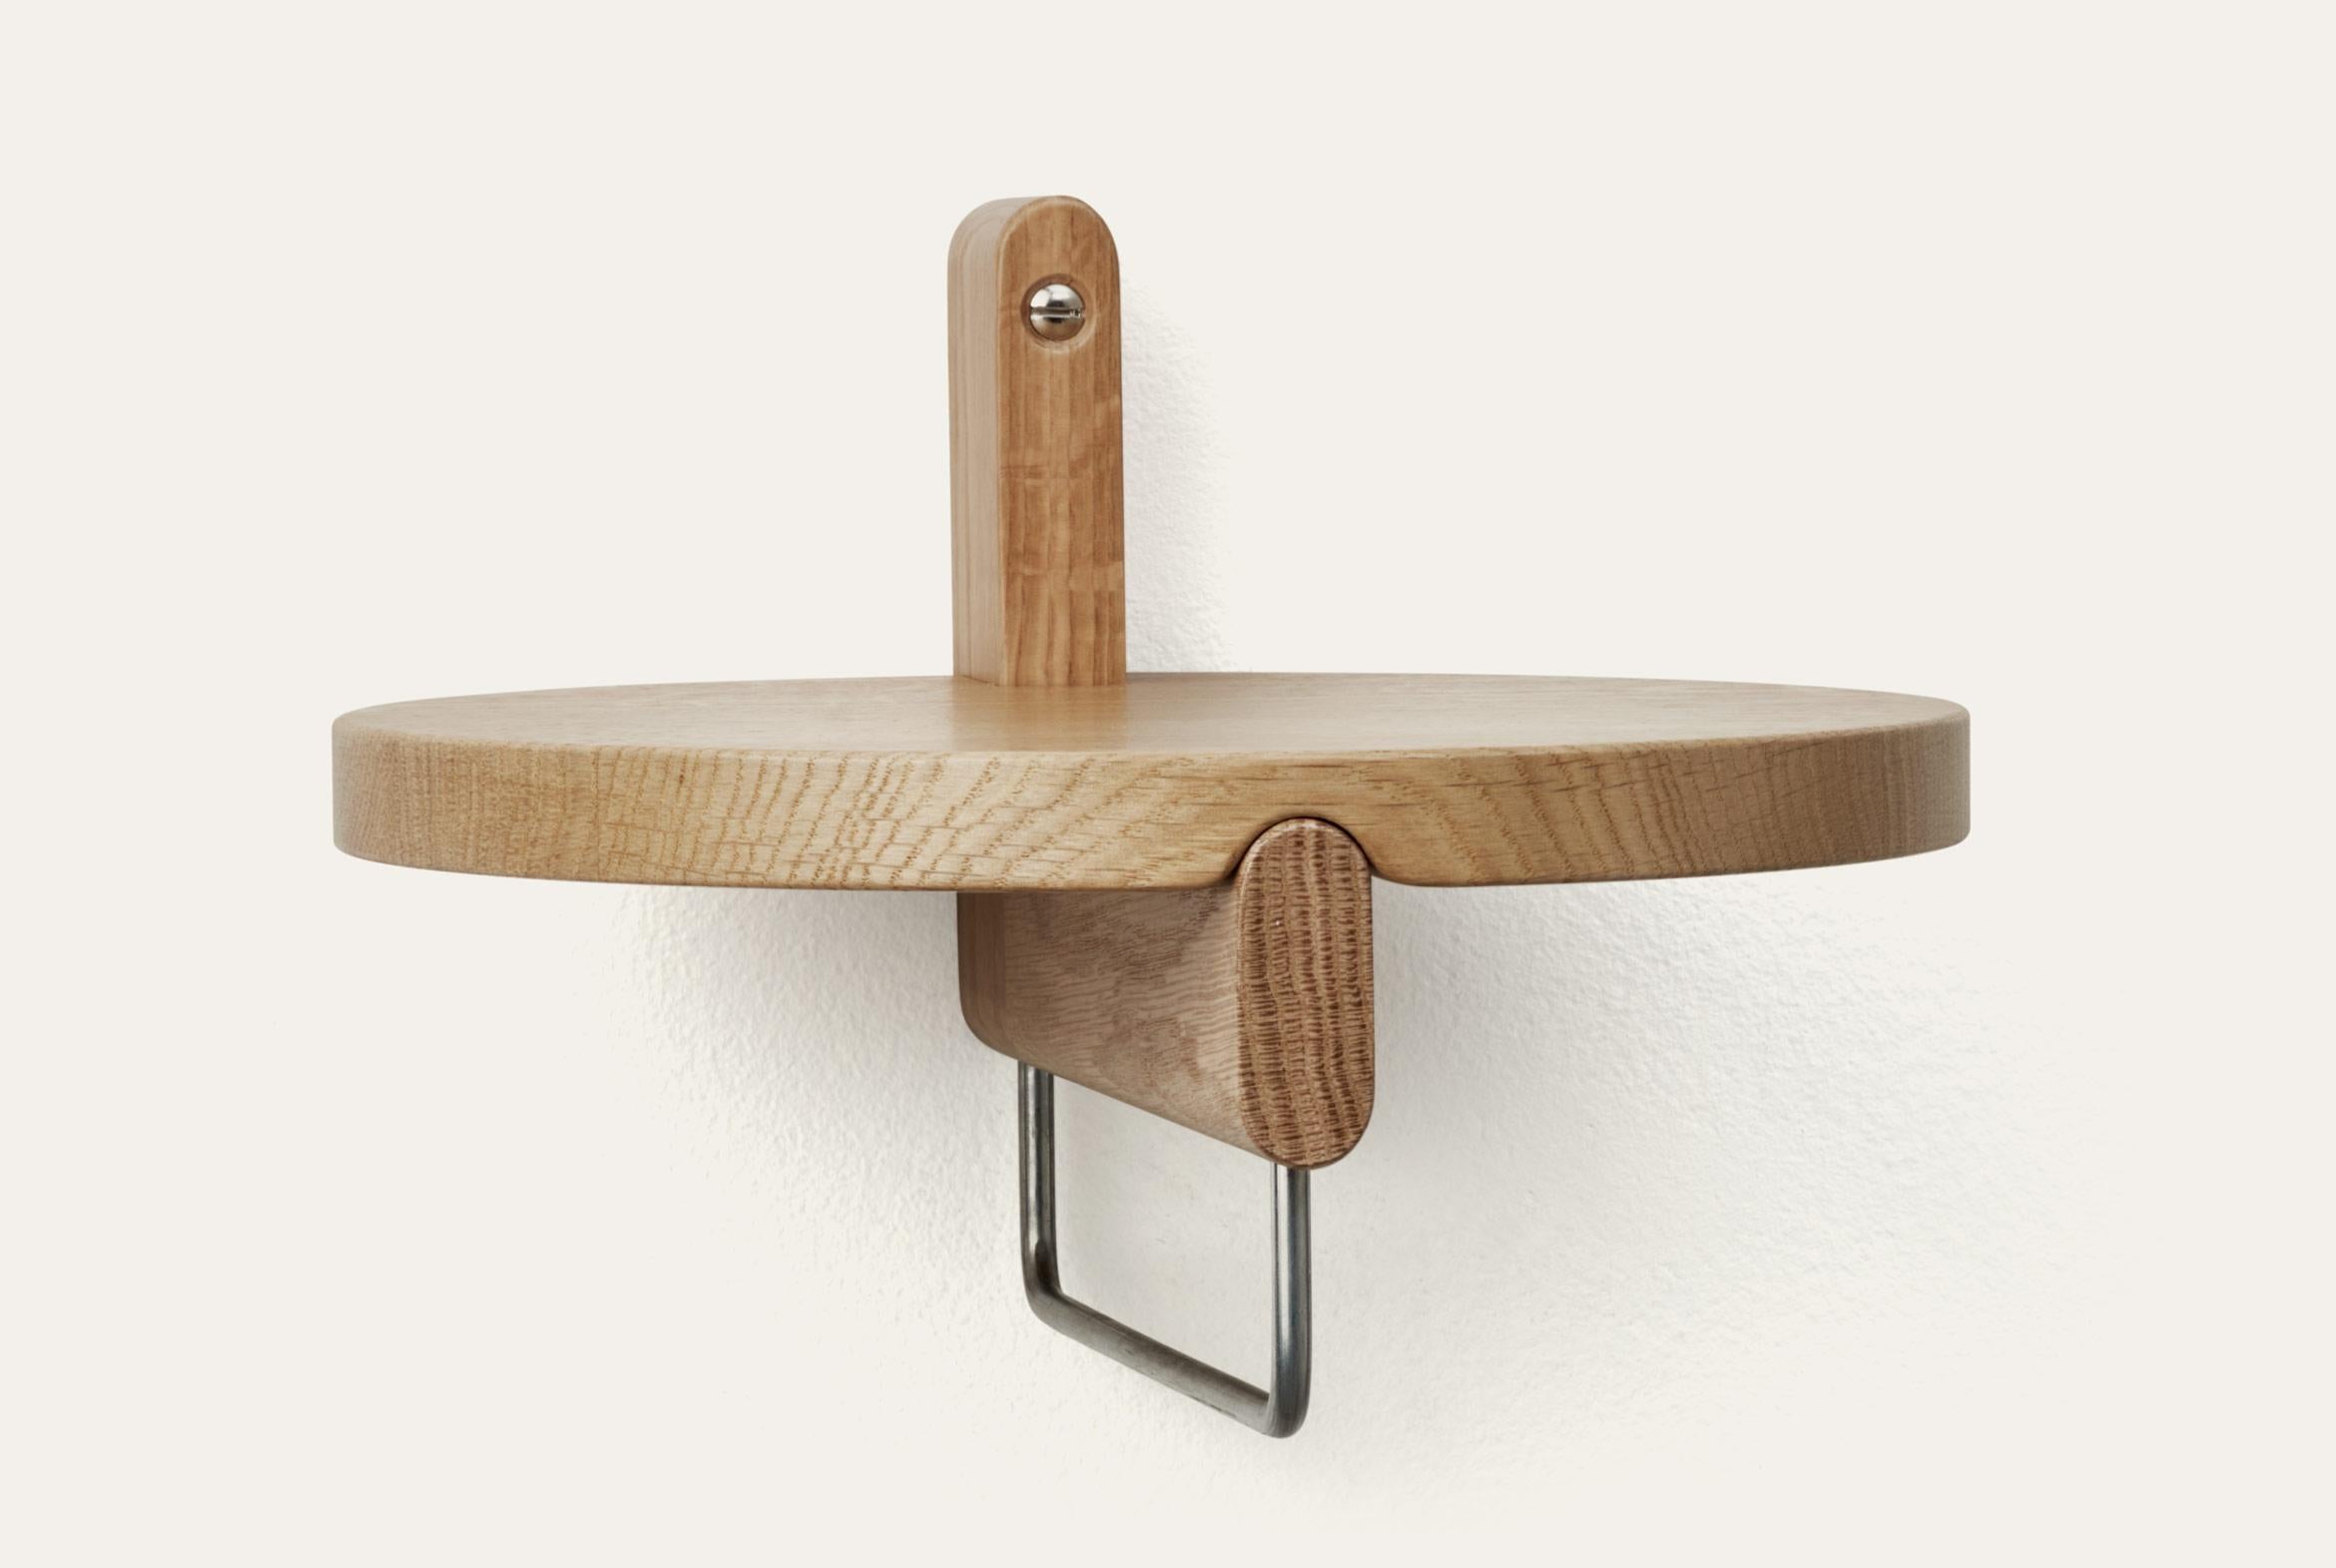 Natural Rondelle round shelf with hanger by Storängen Design
Dimensions: D 25 x H 18 cm
Materials: oak wood, steel.
Available in other colors and with or without steel hanger.

Rondelle can be a shelf or a small table depending on your needs.